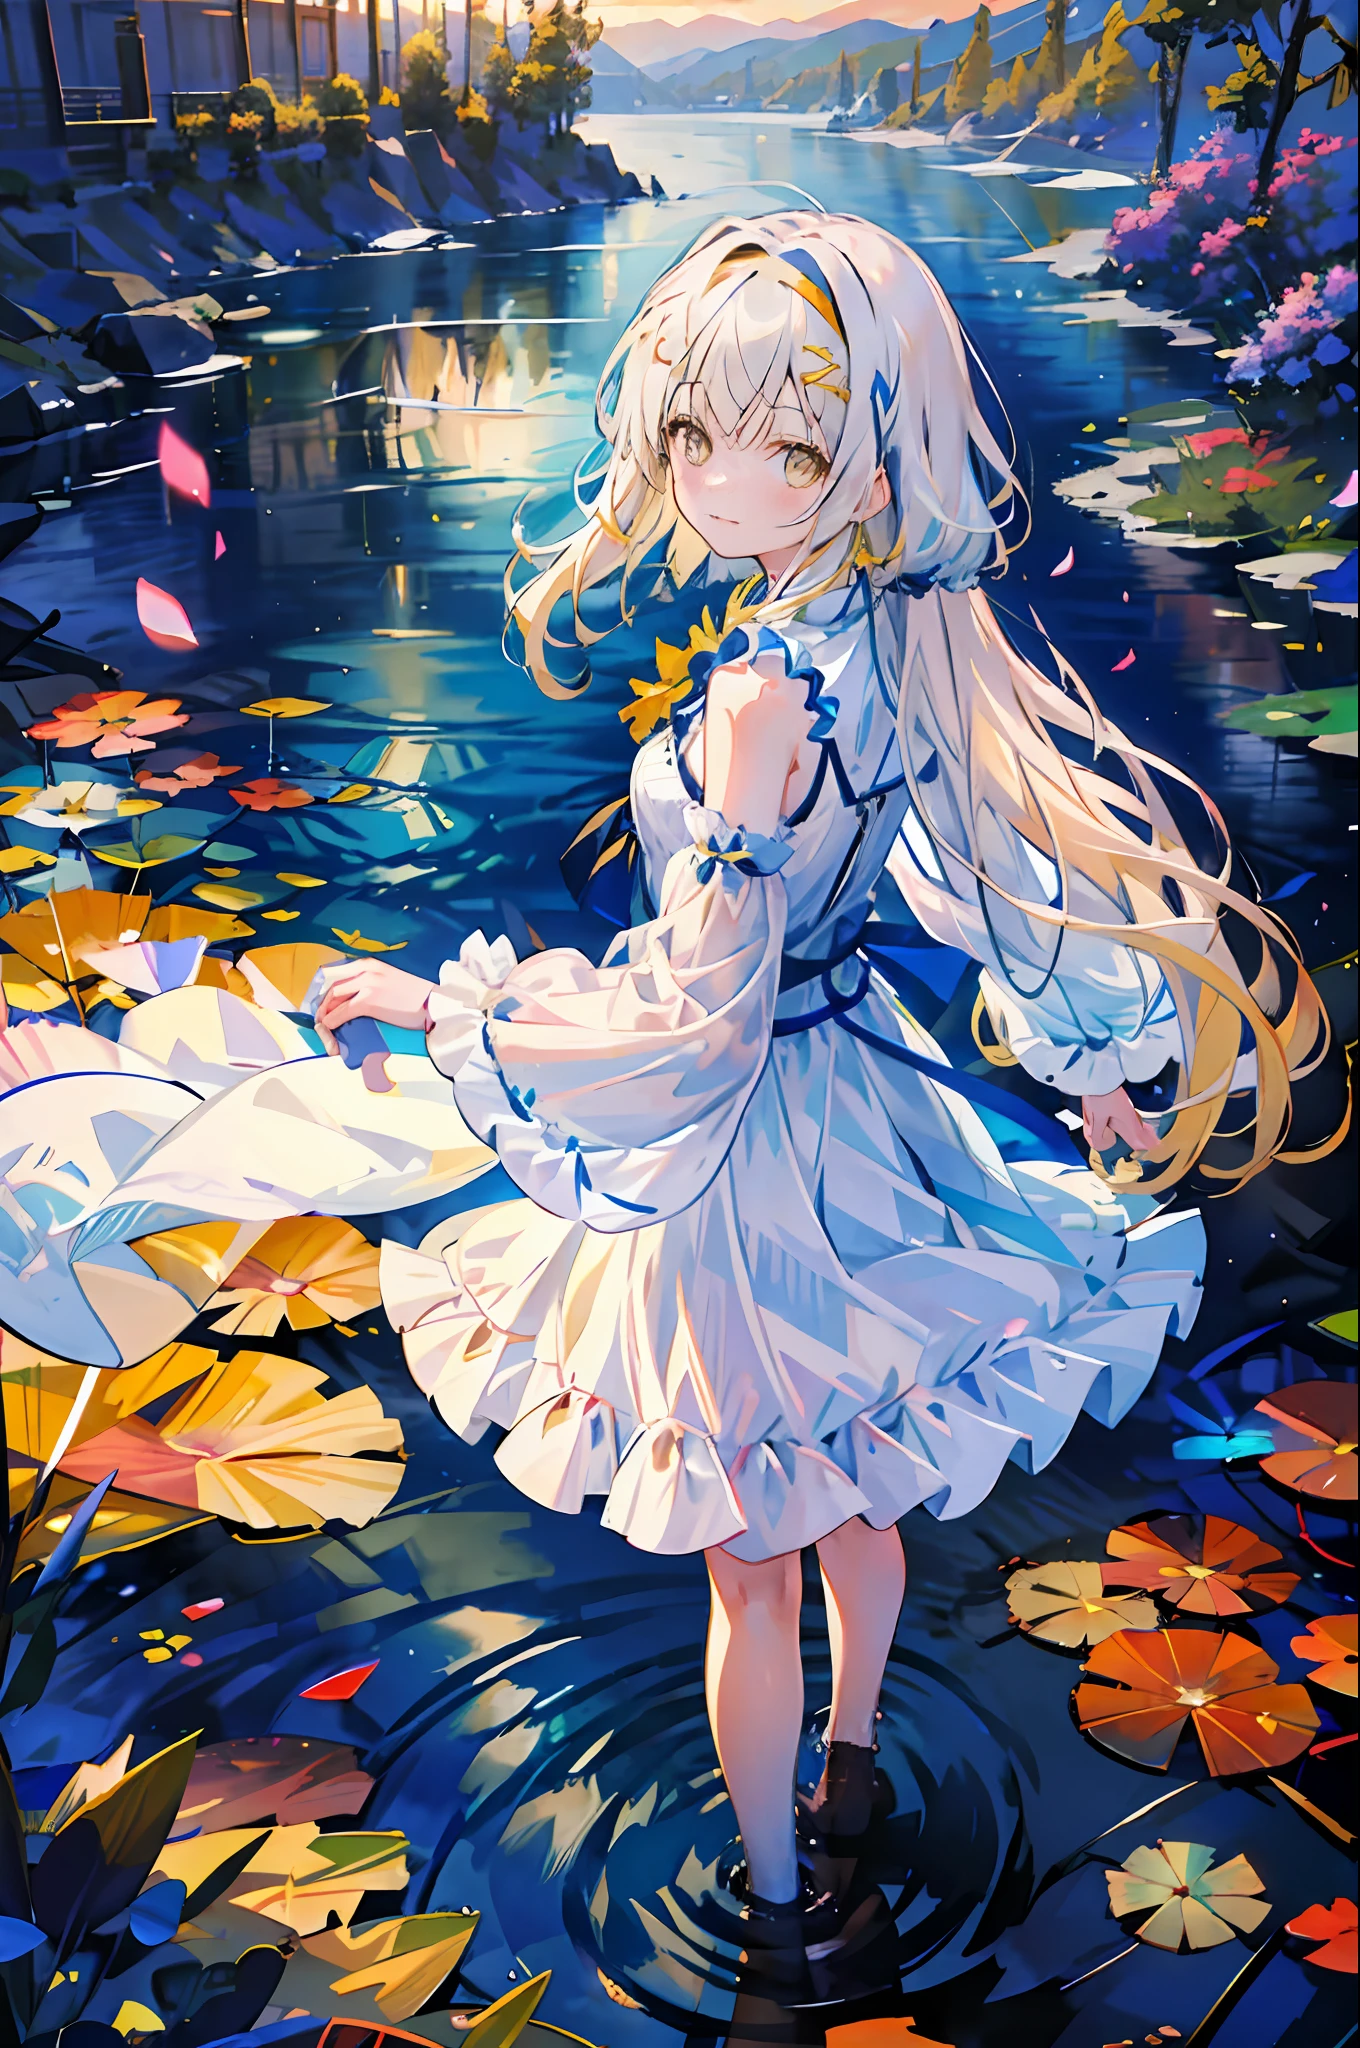 (Highest picture quality), (Master's work),(Detailed eyes description),(Detailed face description)(back view), 1girl, yellow eyes, shiina mahiru, yellow hair,(very long hair),very long hair (floating in the wind), back-view, looking back, hair ornament, flower hair ornament. head band, ribbon, white dress, visible shoulders, blush, pond, petals (lens flare), walking on pond, water reflection, pond, cleavage, medium breast, aurora sky, night sky, galaxy sky, horizon, mountains, forest, moon, (cover-style:1.3), fashionable, woman, vibrant, posing, front, colorful, dynamic, background, elements, shy, expression, holding, statement, accessory, majestic, coiled, around, touch, scene, attention-grabbing, catchy, modern, trendy, focus, fashion, realistic lighting, extreme blushing